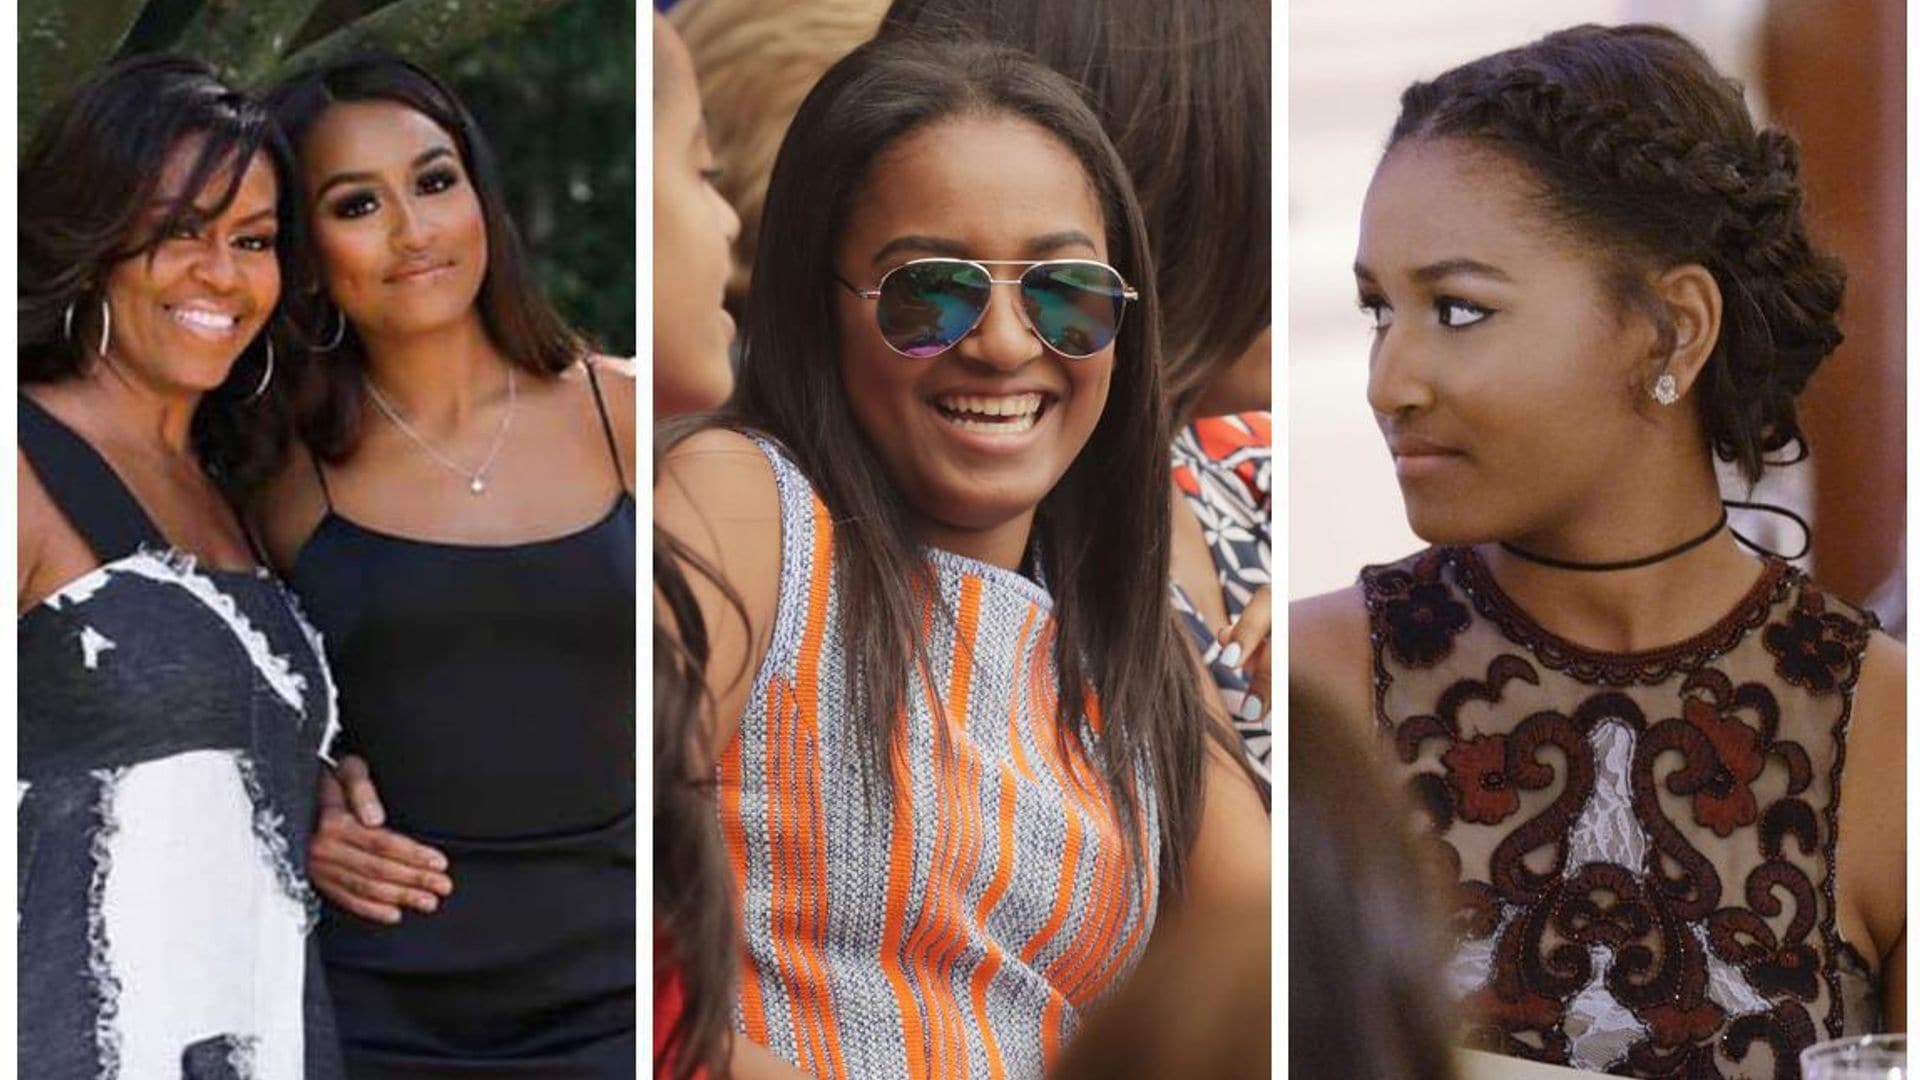 The definitive guide to Sasha Obama’s style, from teen first daughter to college kid